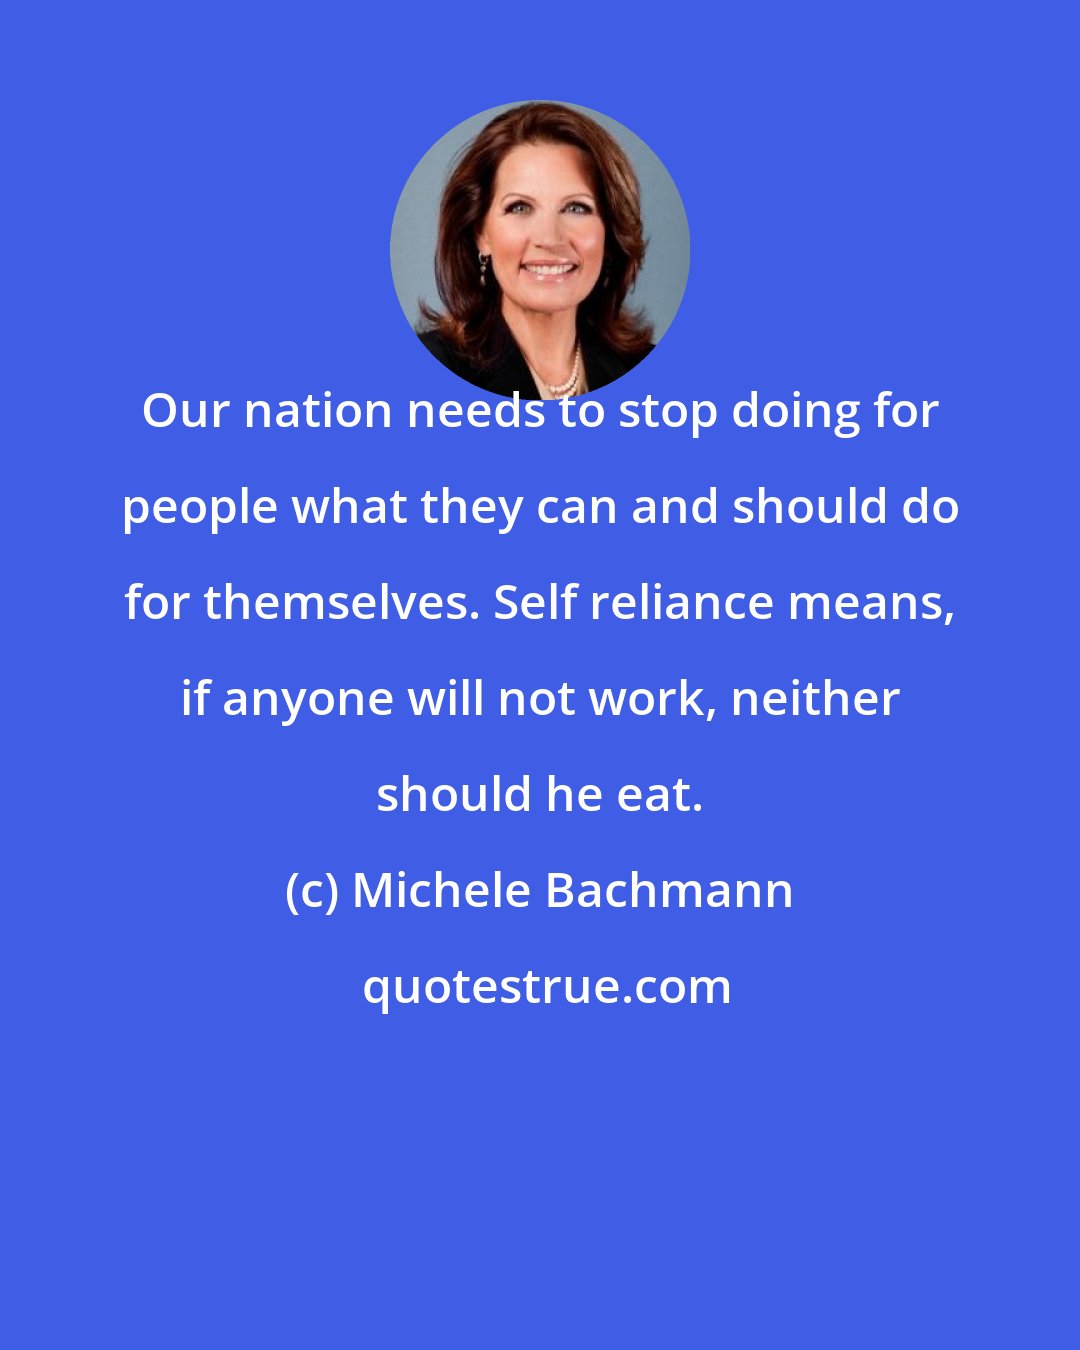 Michele Bachmann: Our nation needs to stop doing for people what they can and should do for themselves. Self reliance means, if anyone will not work, neither should he eat.